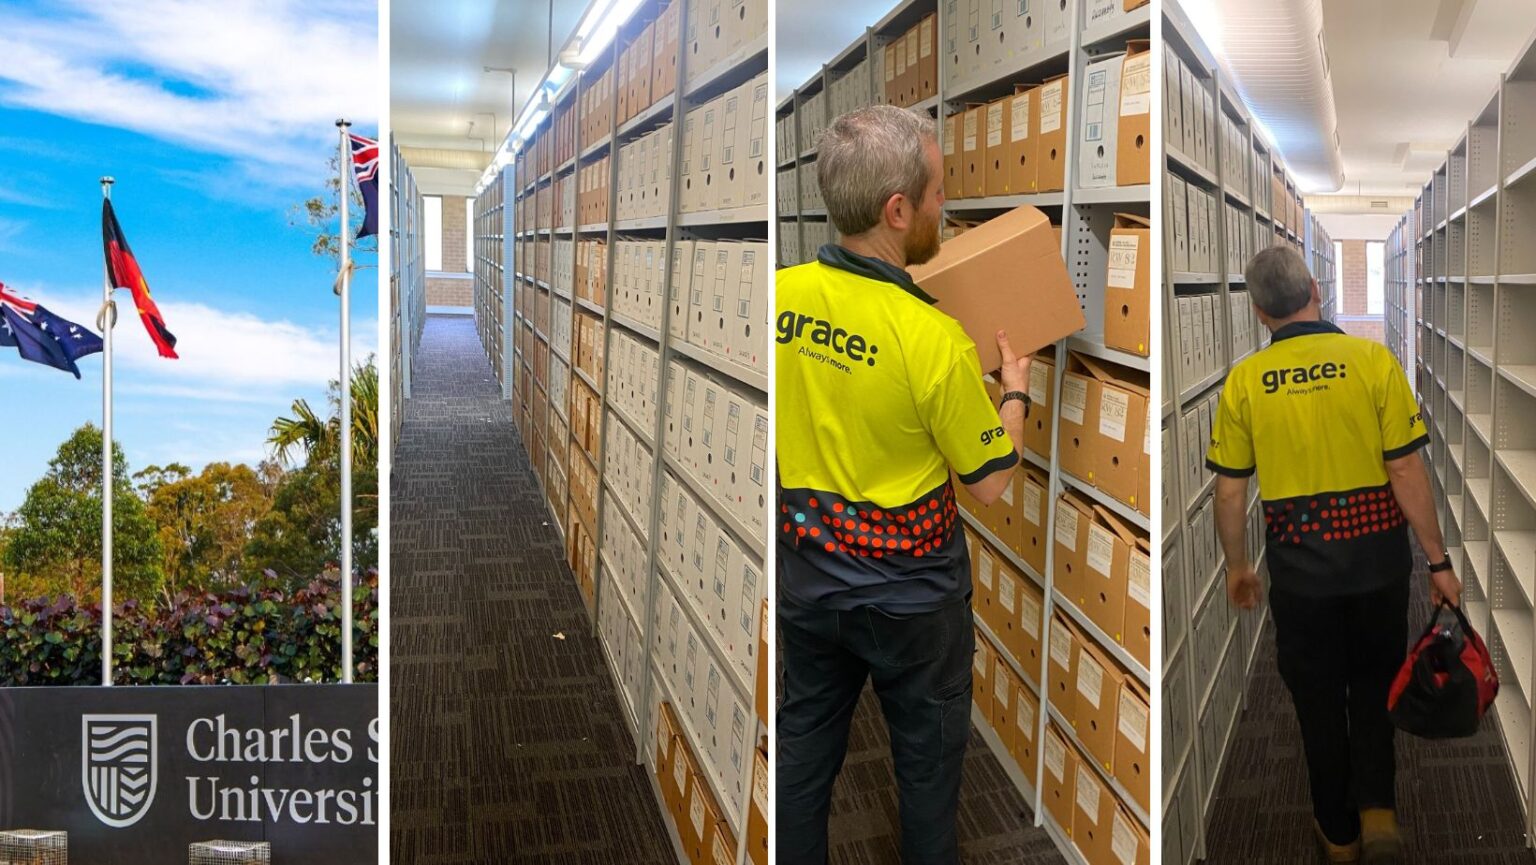 Relocate files and records from the Charles Sturt University’s archival facility